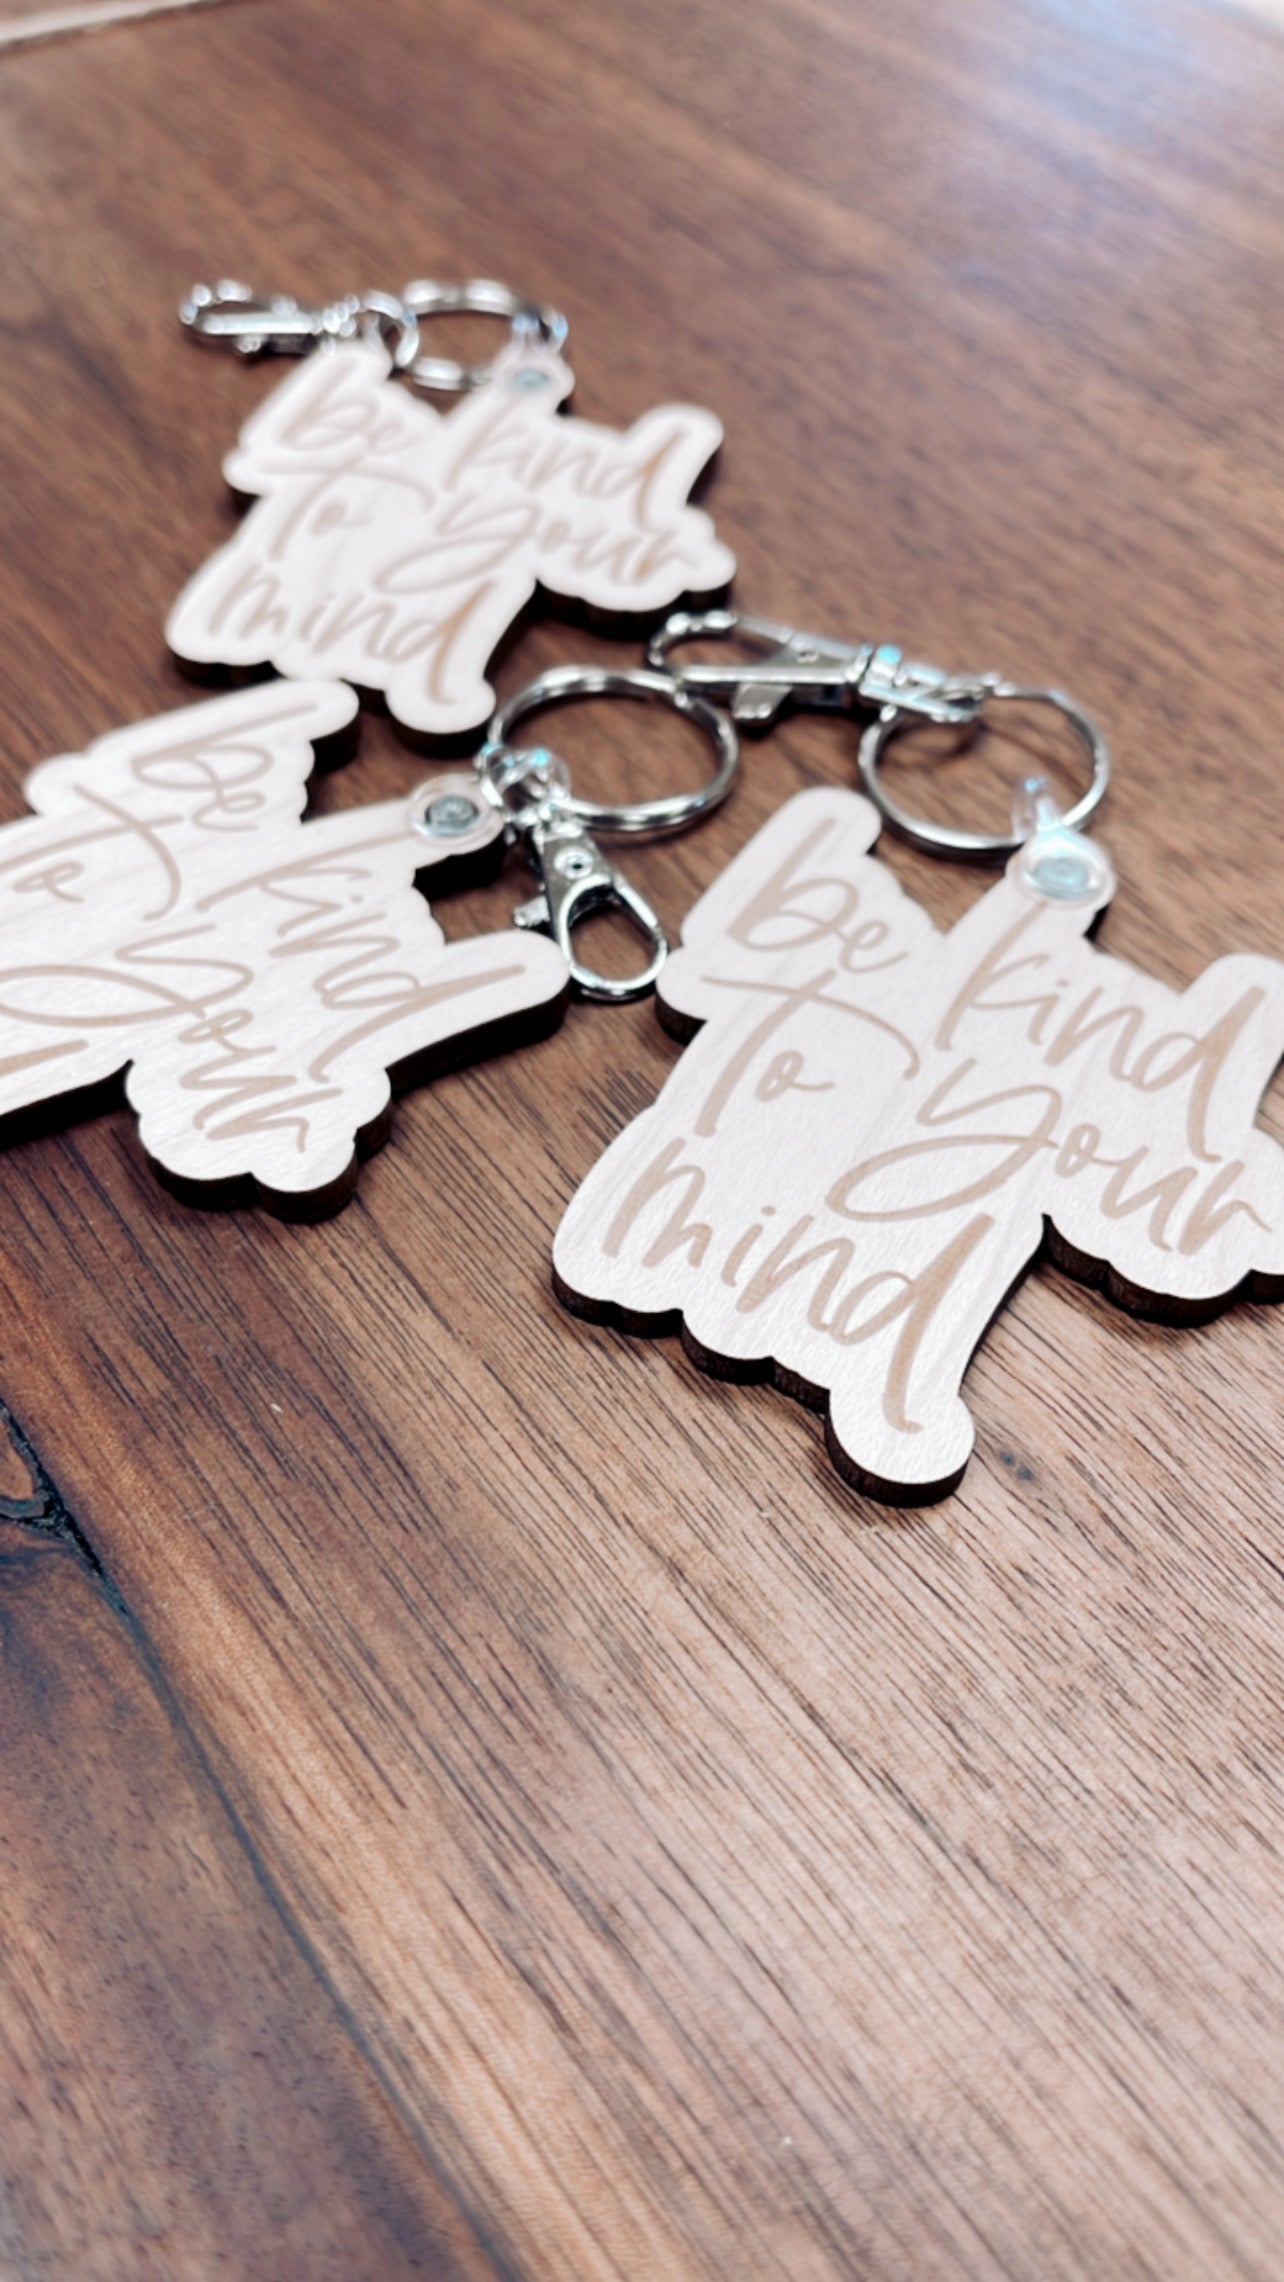 Be Kind To Your Mind Keychain